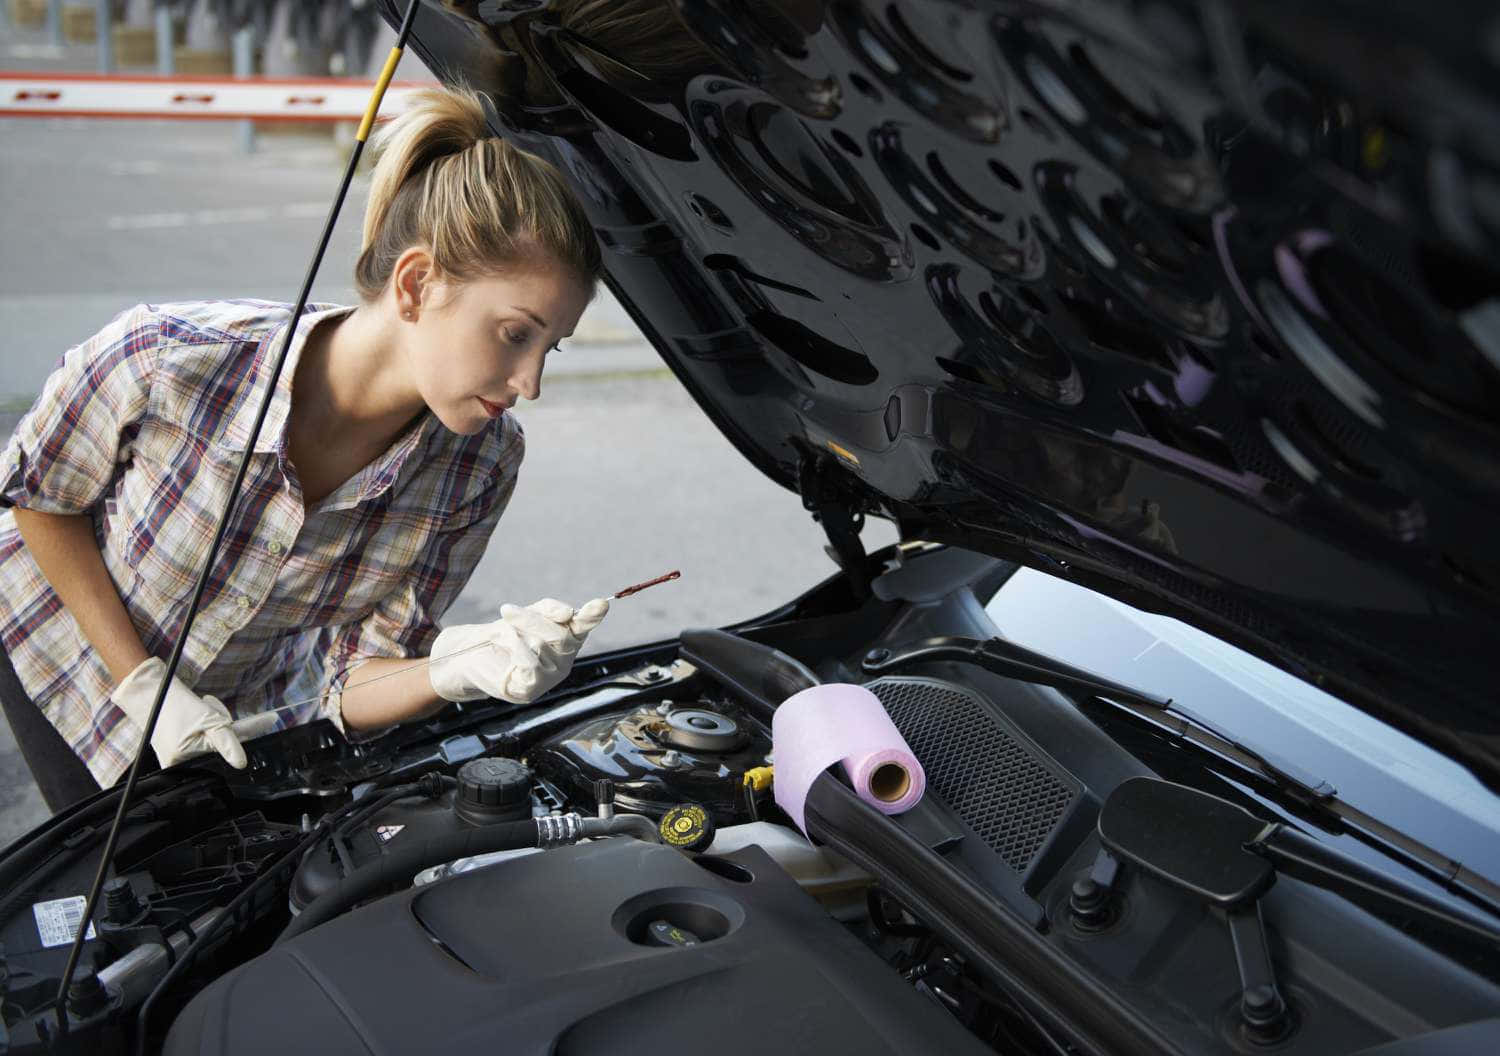 Change your engine oil regularly to keep your car running smoothly